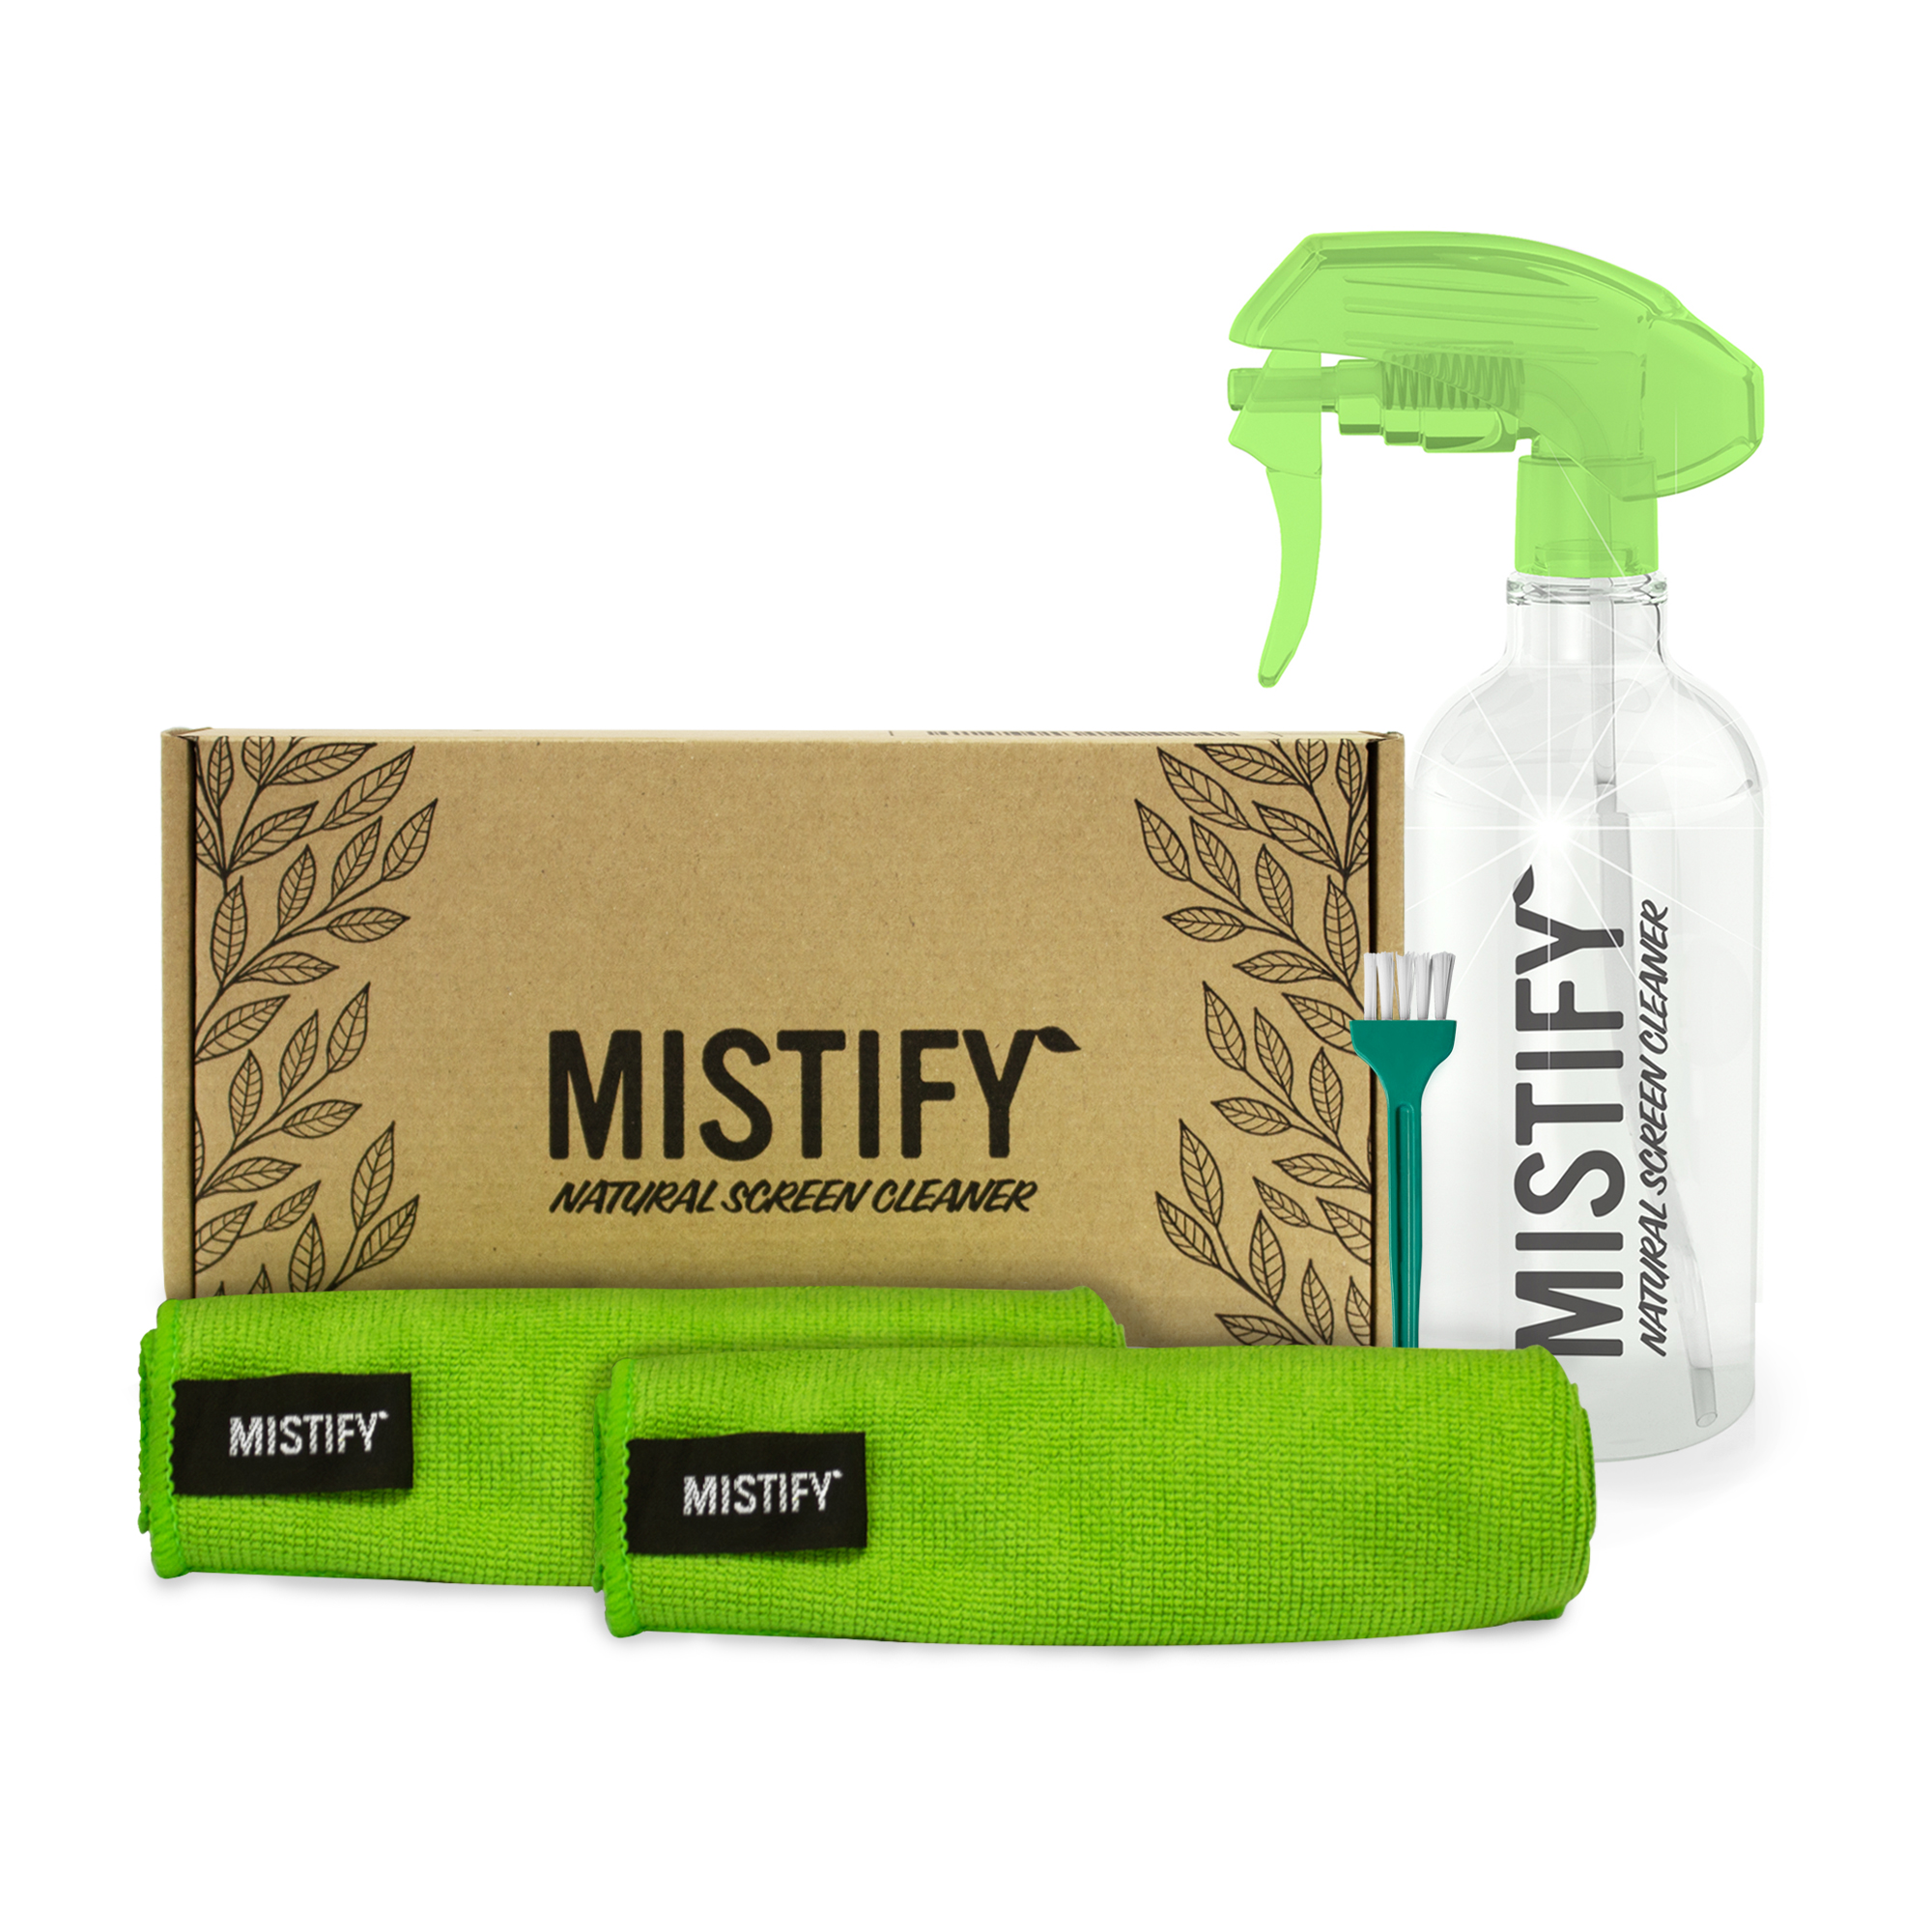 Mistify Natural Screen Cleaner Kit, 500ml with 2 x microfibre cloths and cleaning brush.